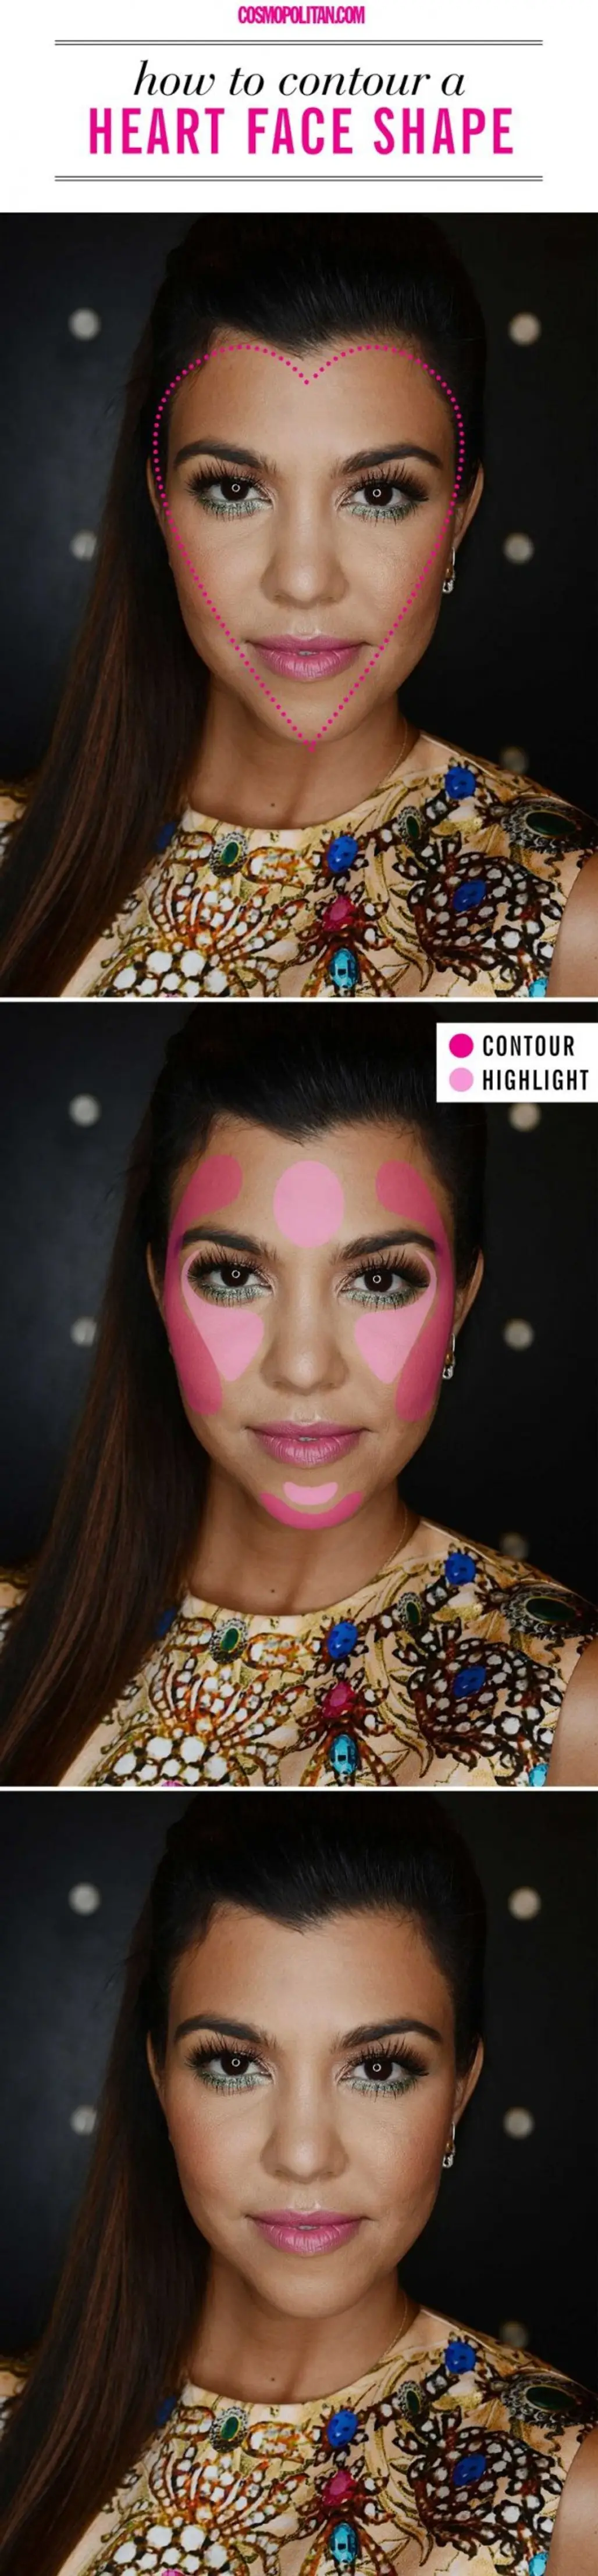 How to Contour if You Have a Heart Face Shape